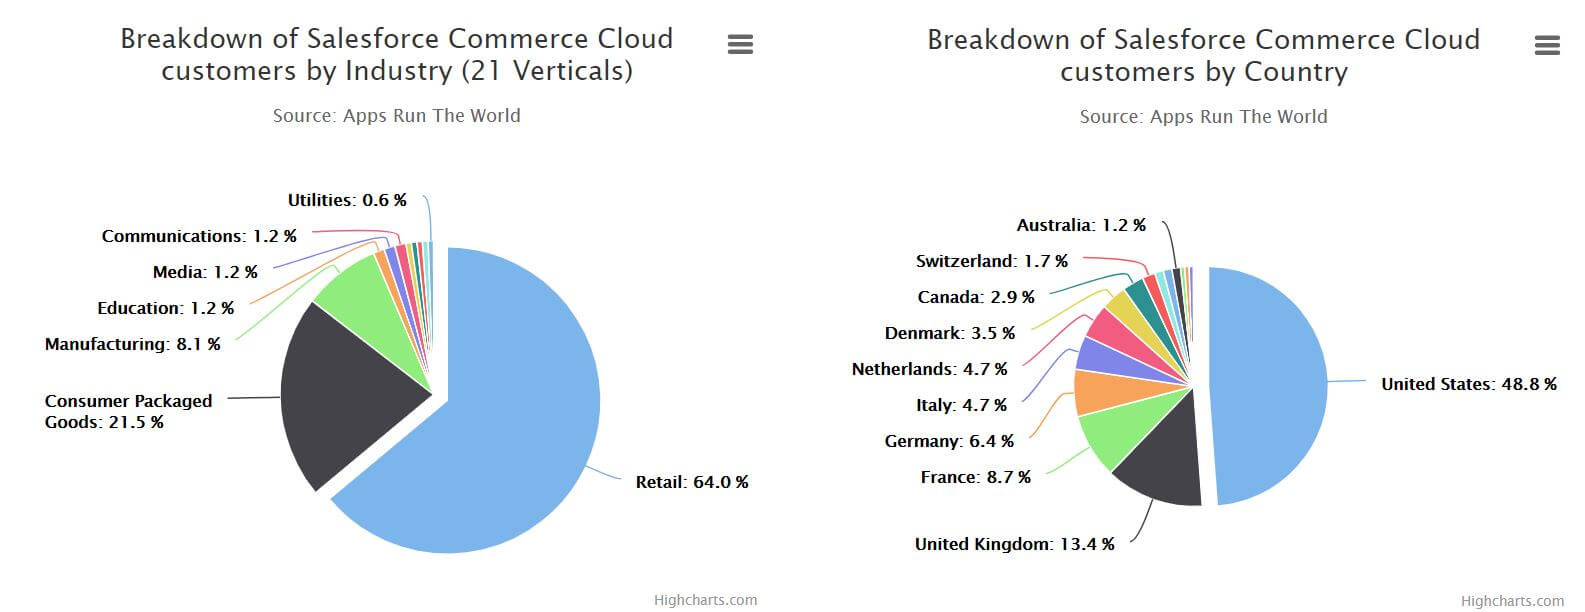 What Types of Companies Use the Salesforce Commerce Cloud?